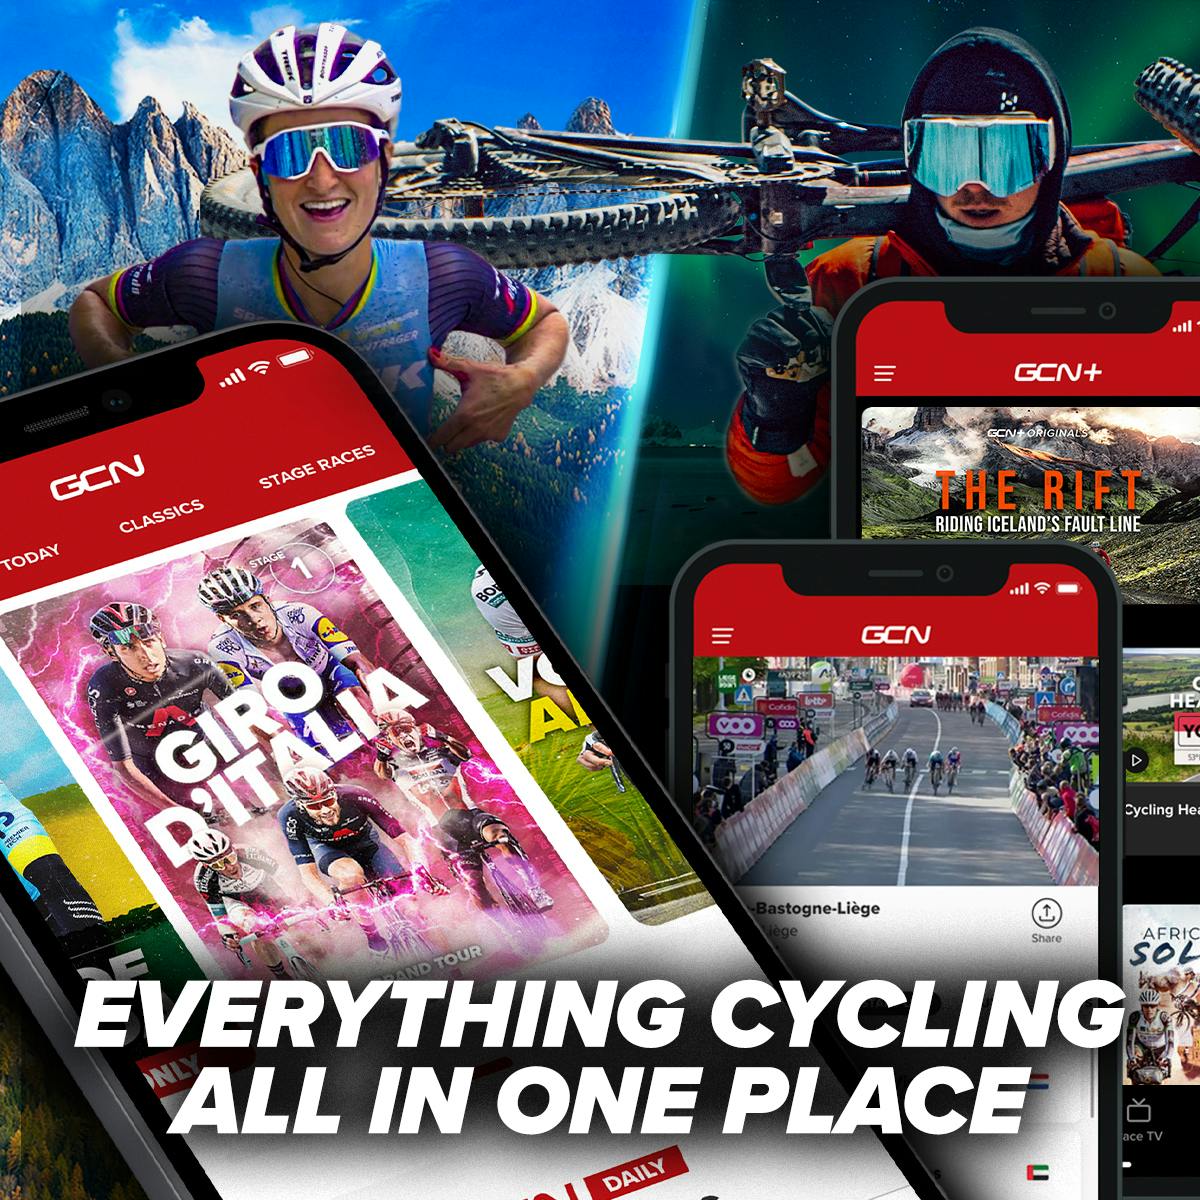 Welcome to the GCN App

